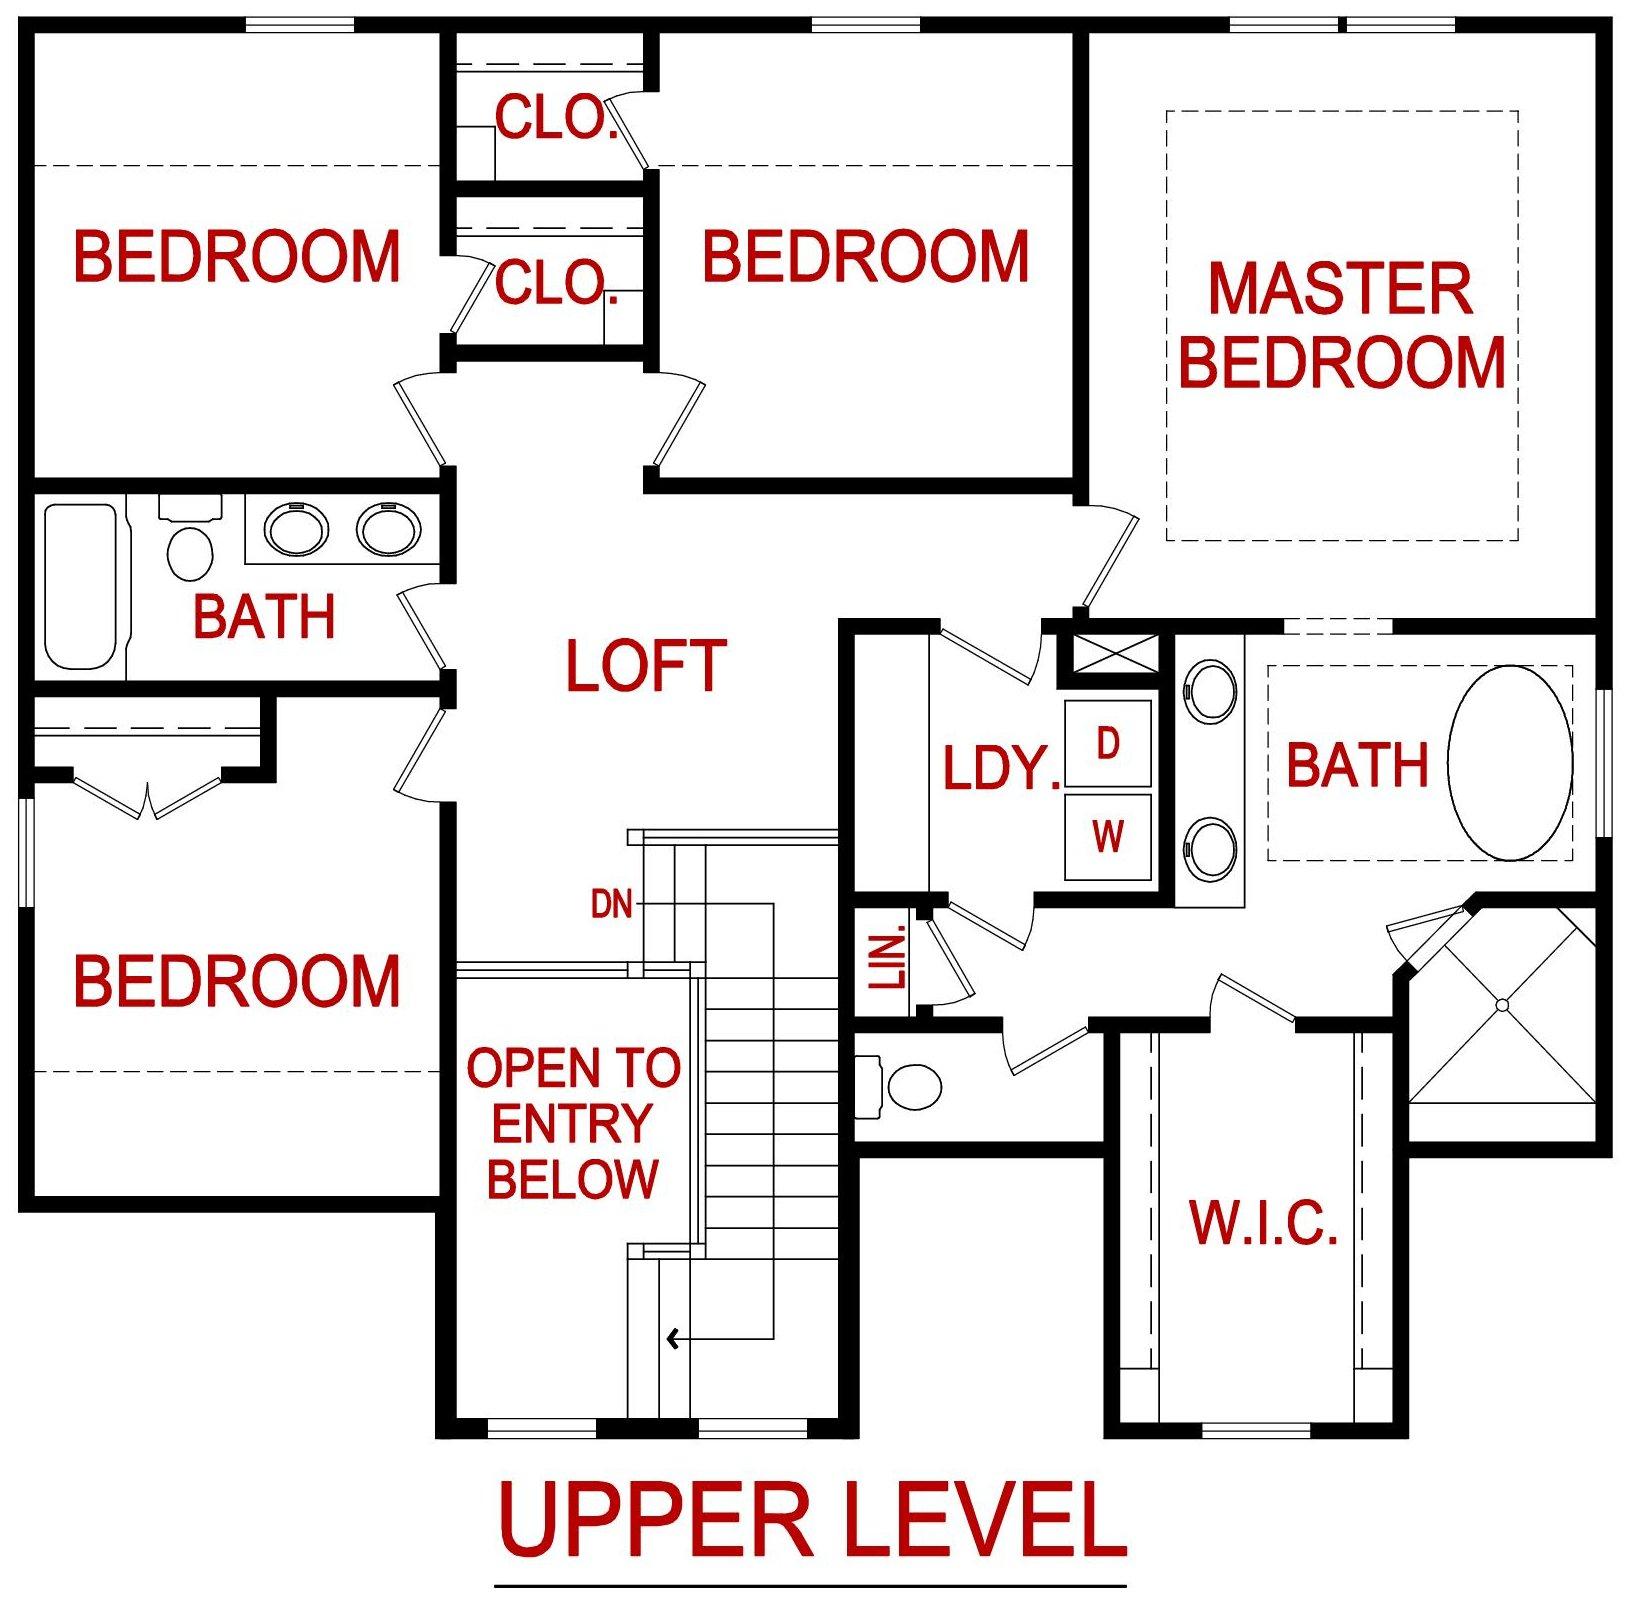 upper level floor plan of a sequoia model from lambie homes